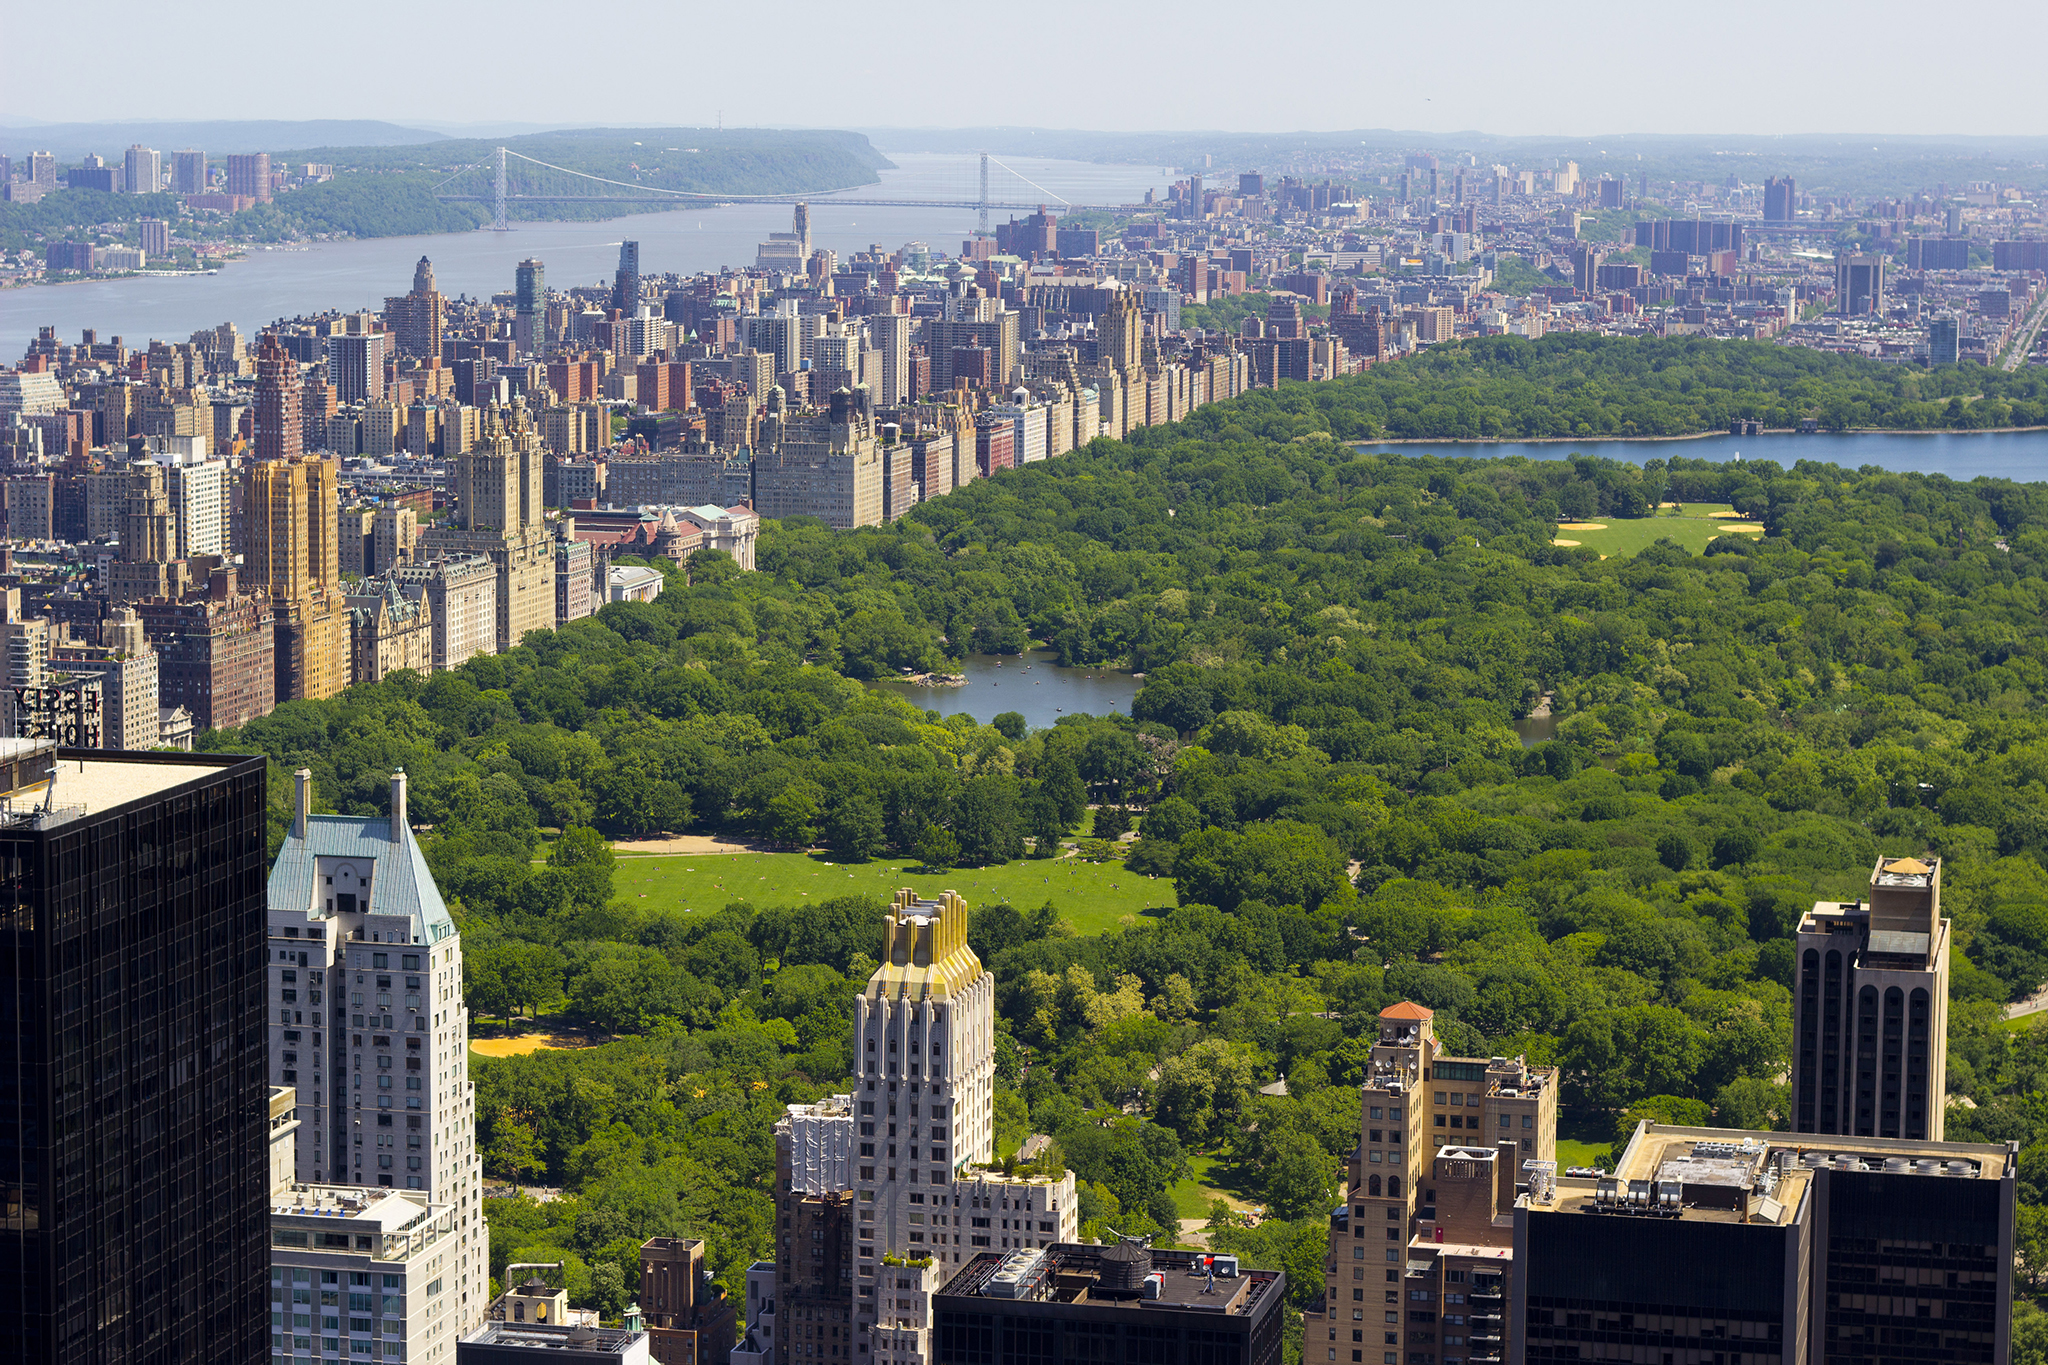 Best things to do in Central Park from boating to events